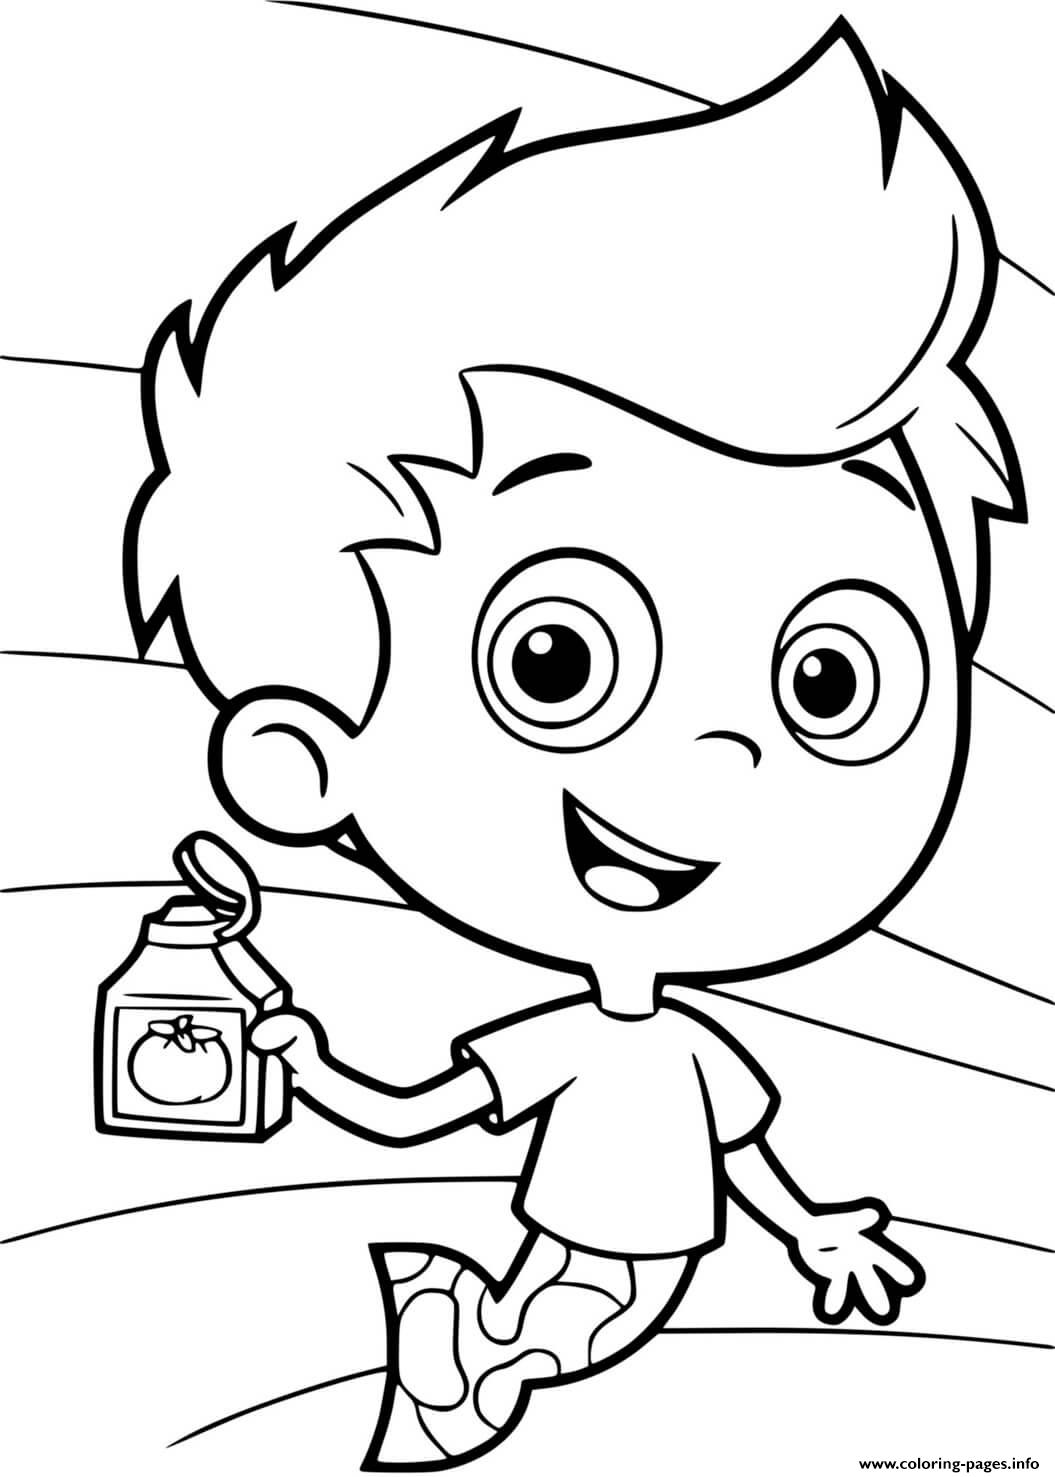 Gil Drink Tomato Juice coloring pages